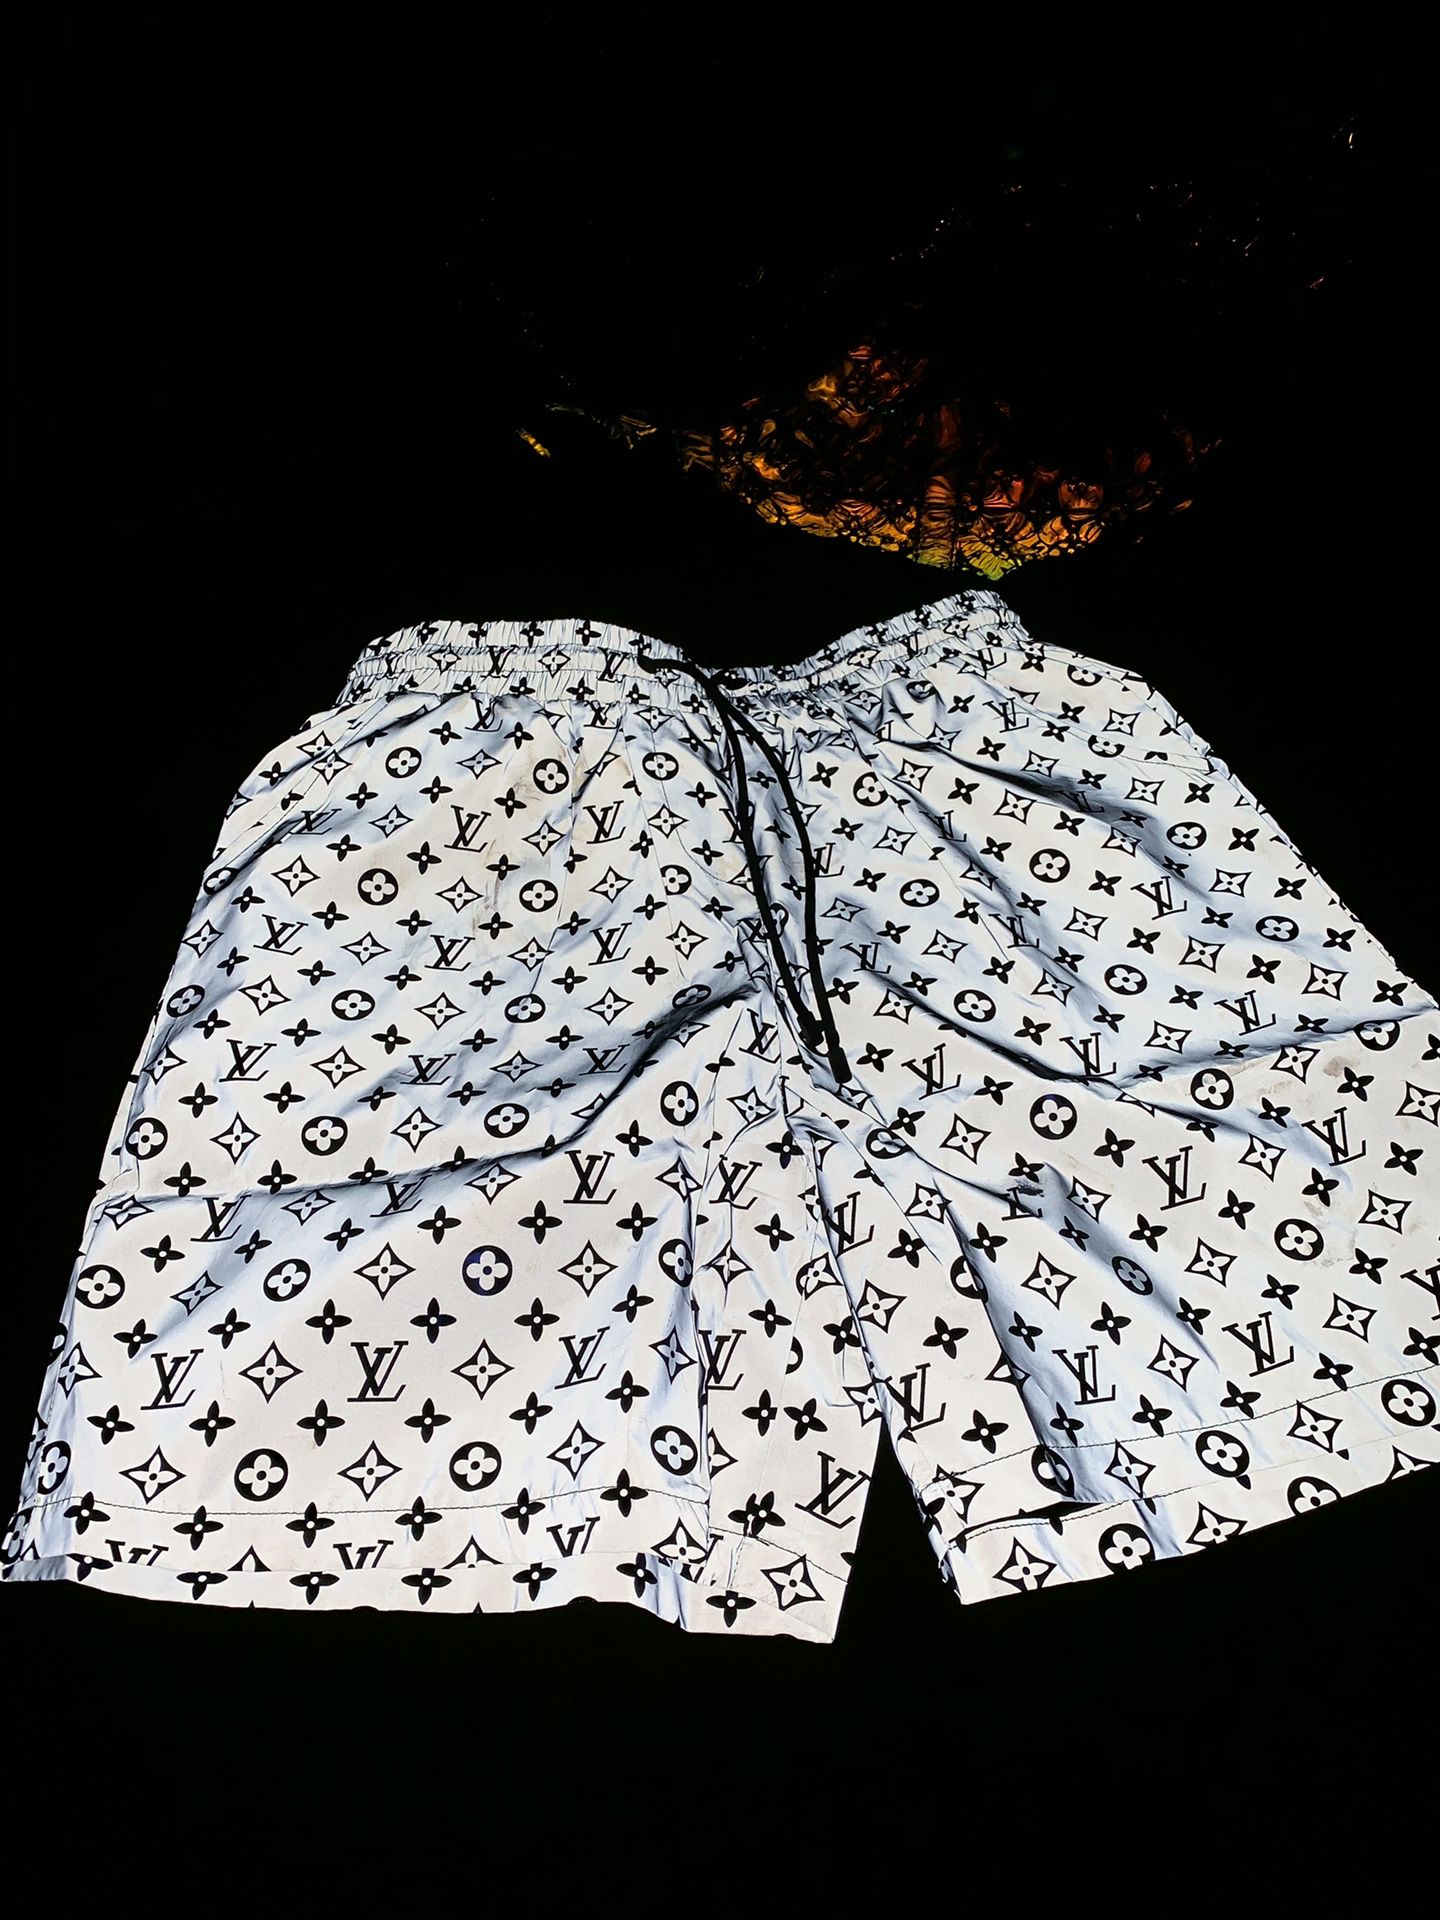 Mens Lv Monogram Shorts Size Large/xl for Sale in San Diego, CA - OfferUp